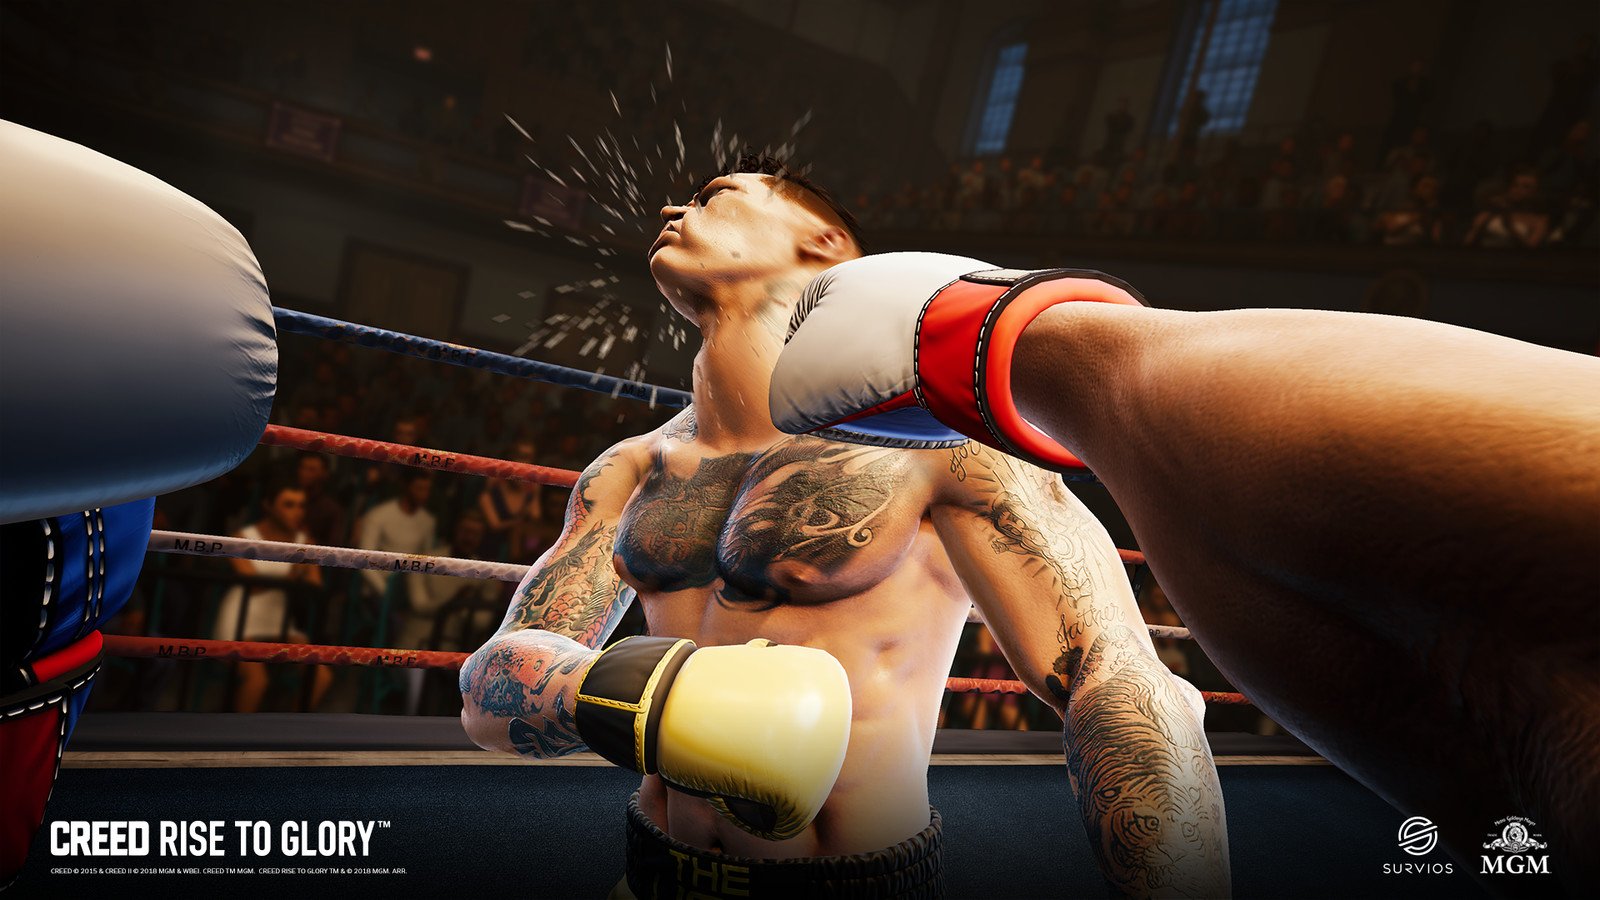 Creed: Rise to Glory is coming to VR headsets Sept. 25 